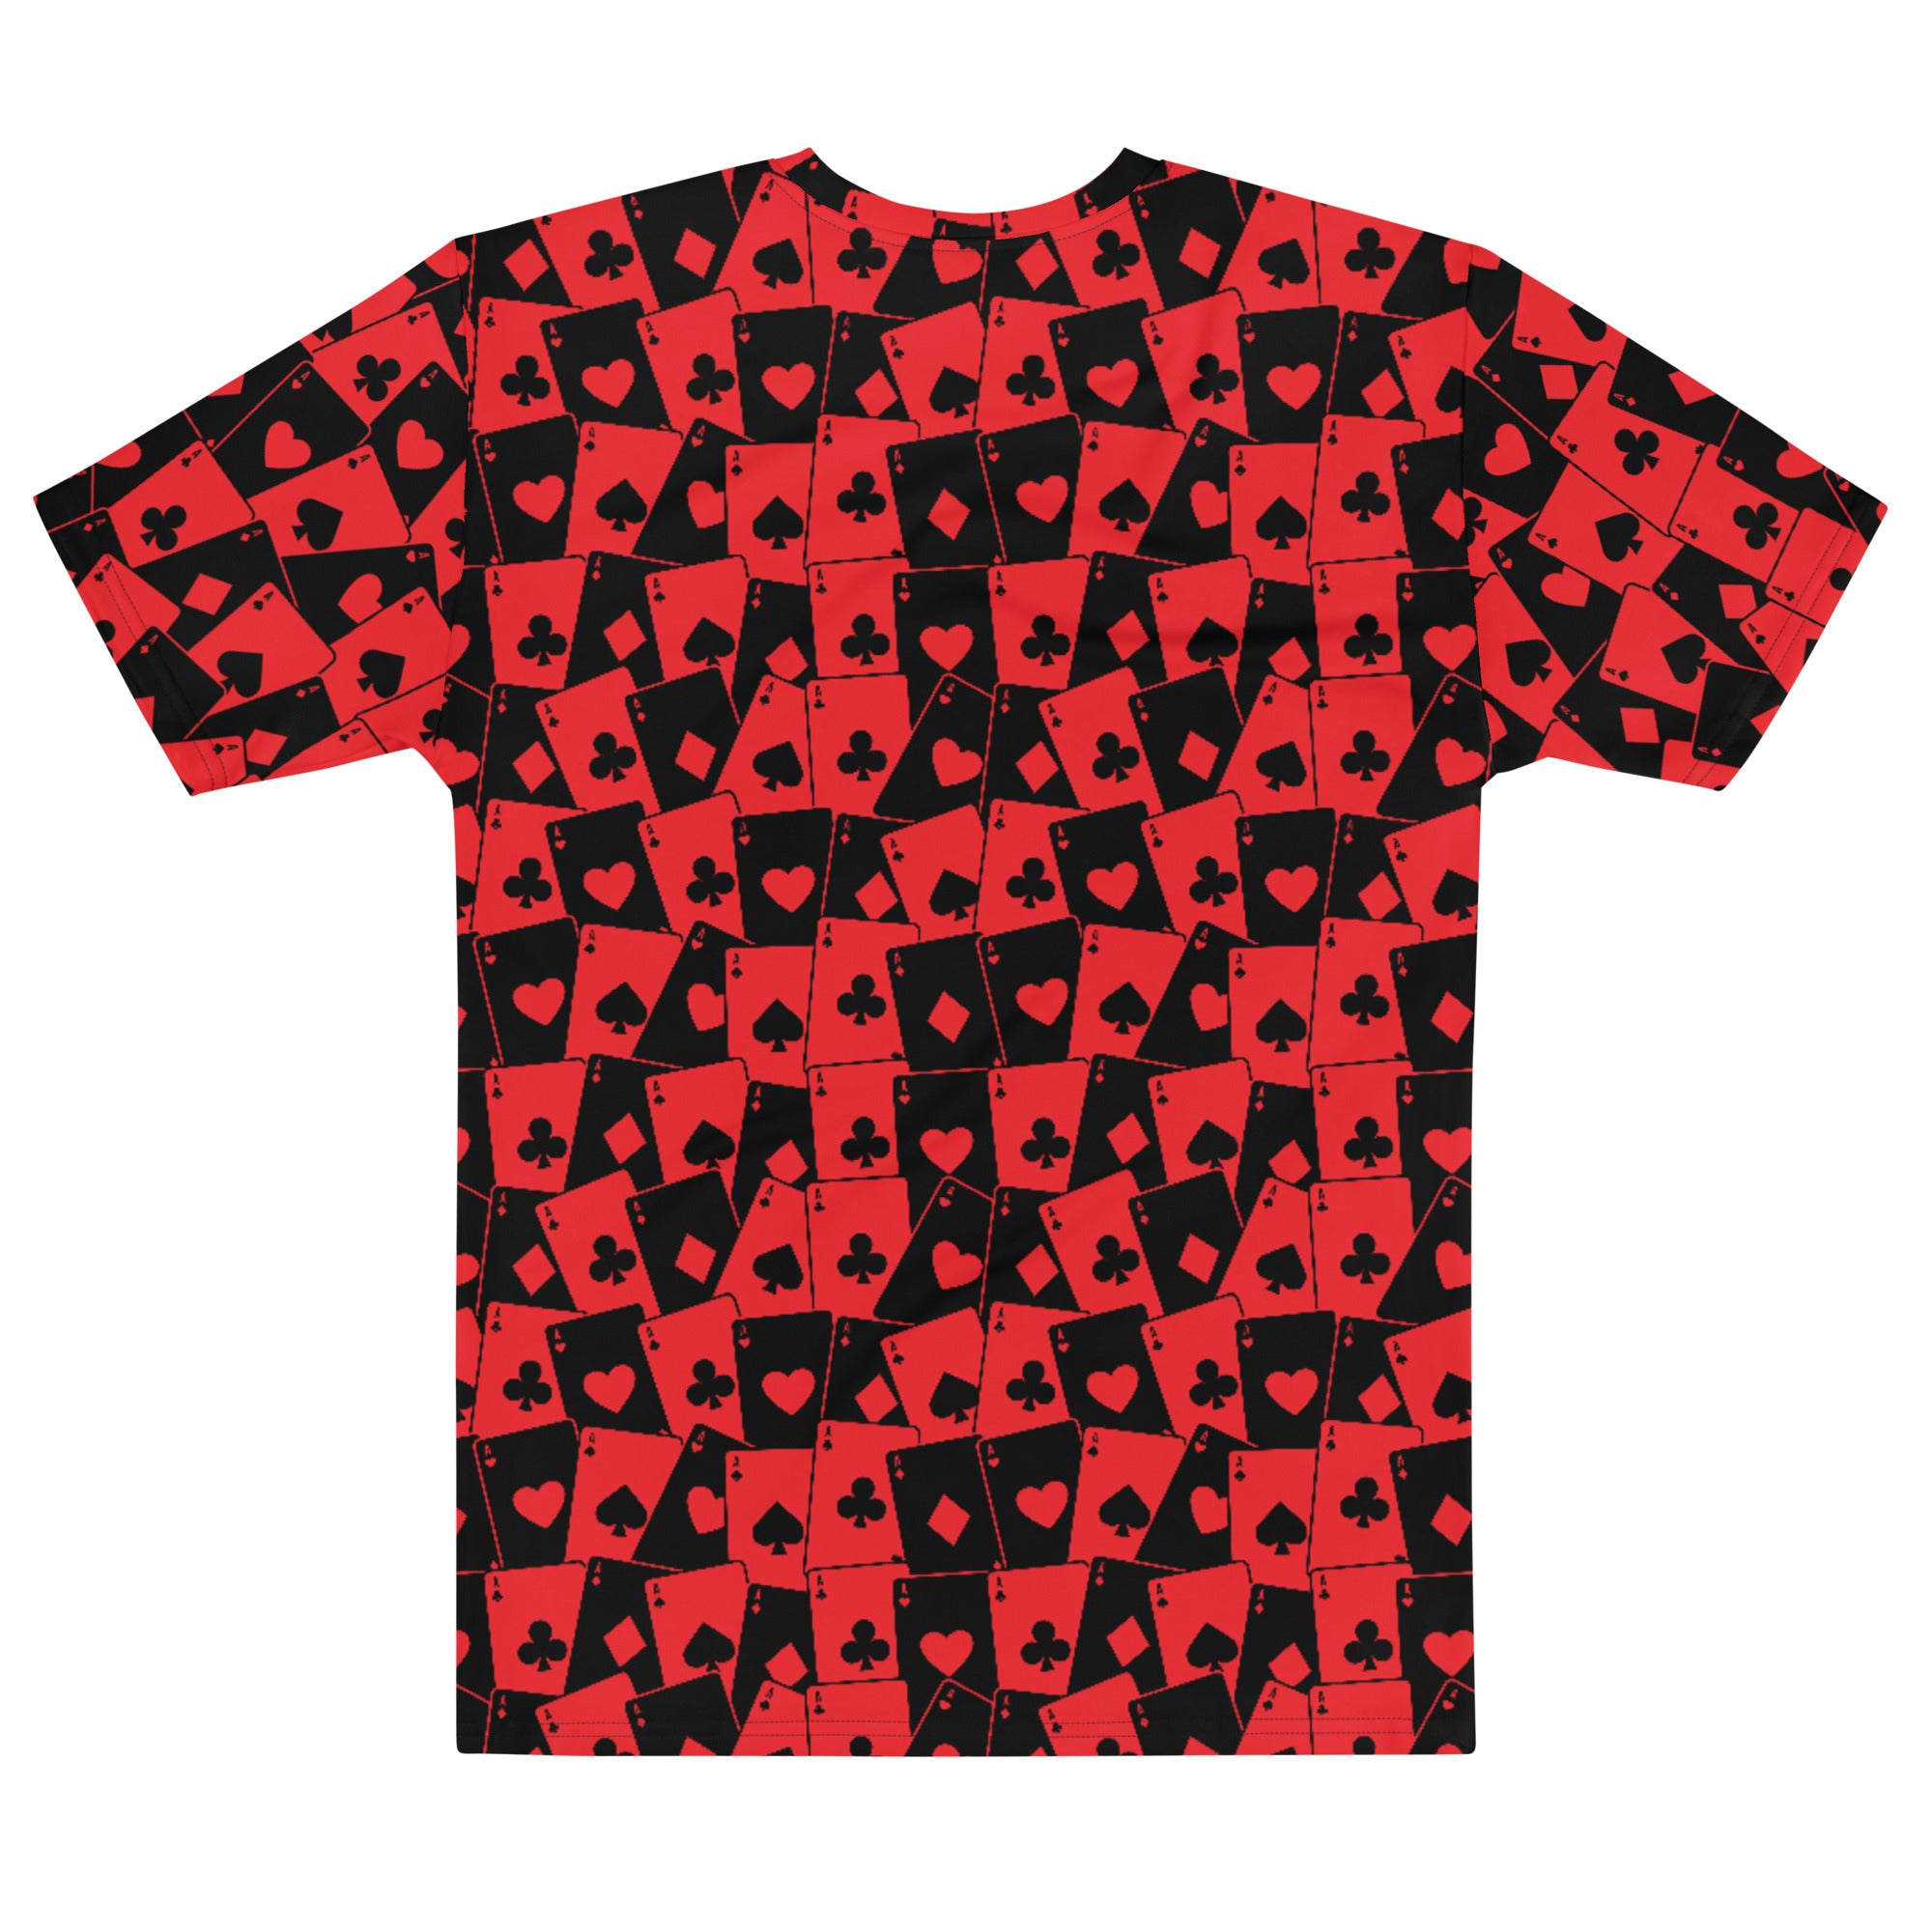 Ace Of Hearts T-Shirt, T-Shirt, - One Stop Rave